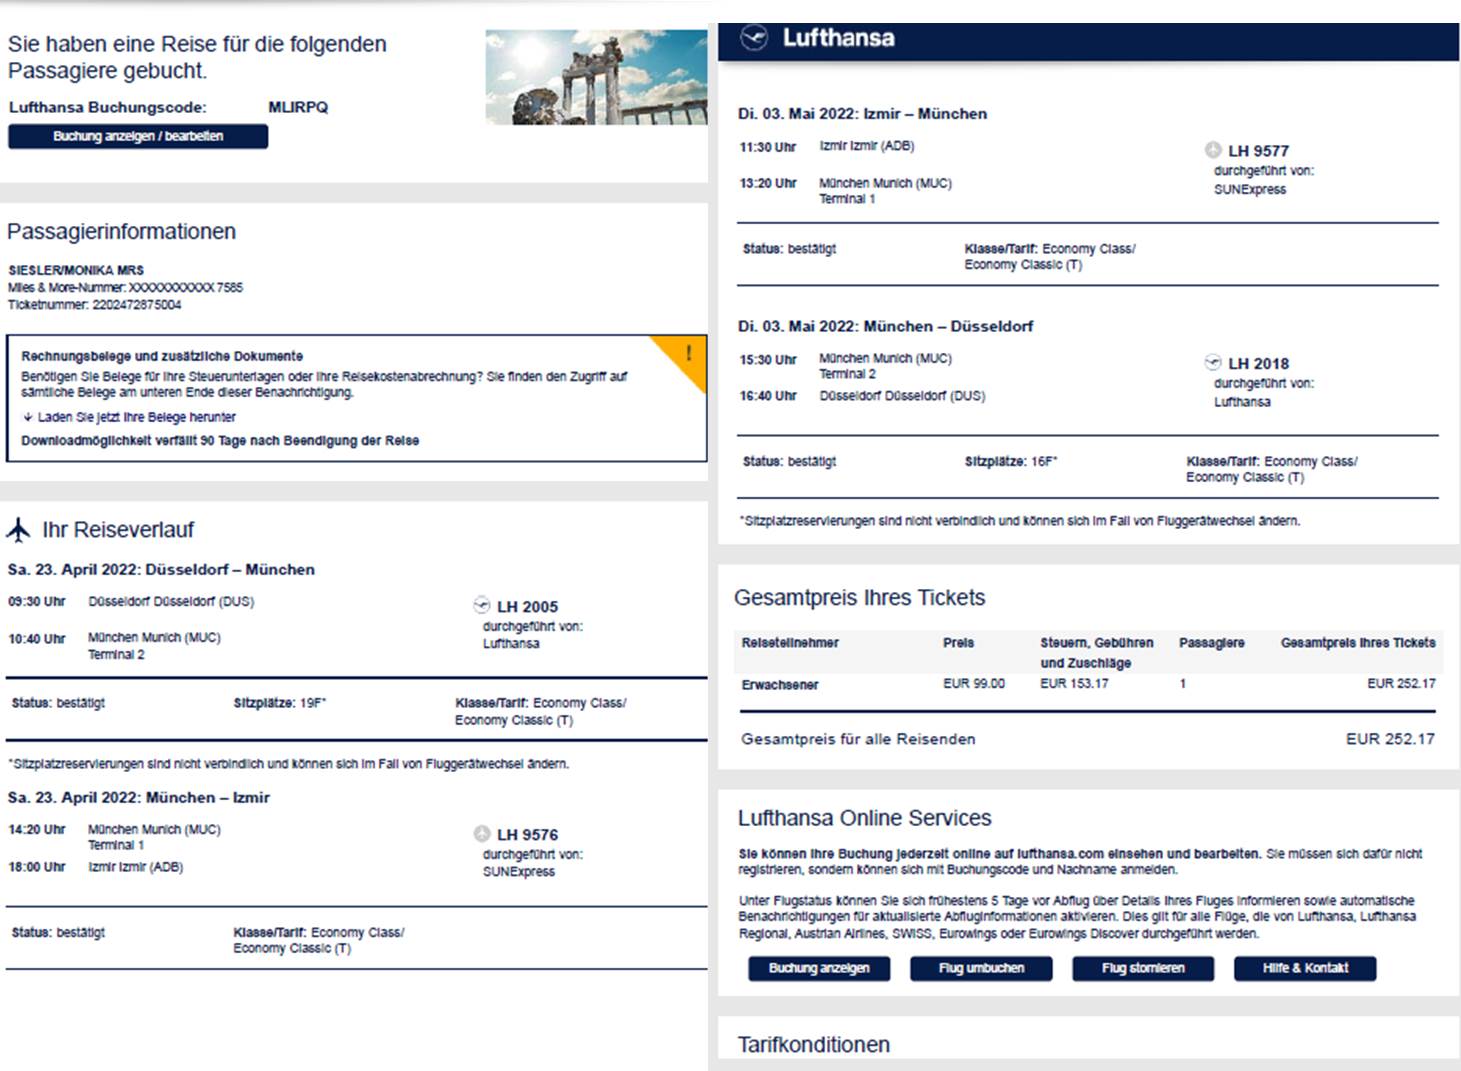 Lufthansa complaint too expensive and too time consuming